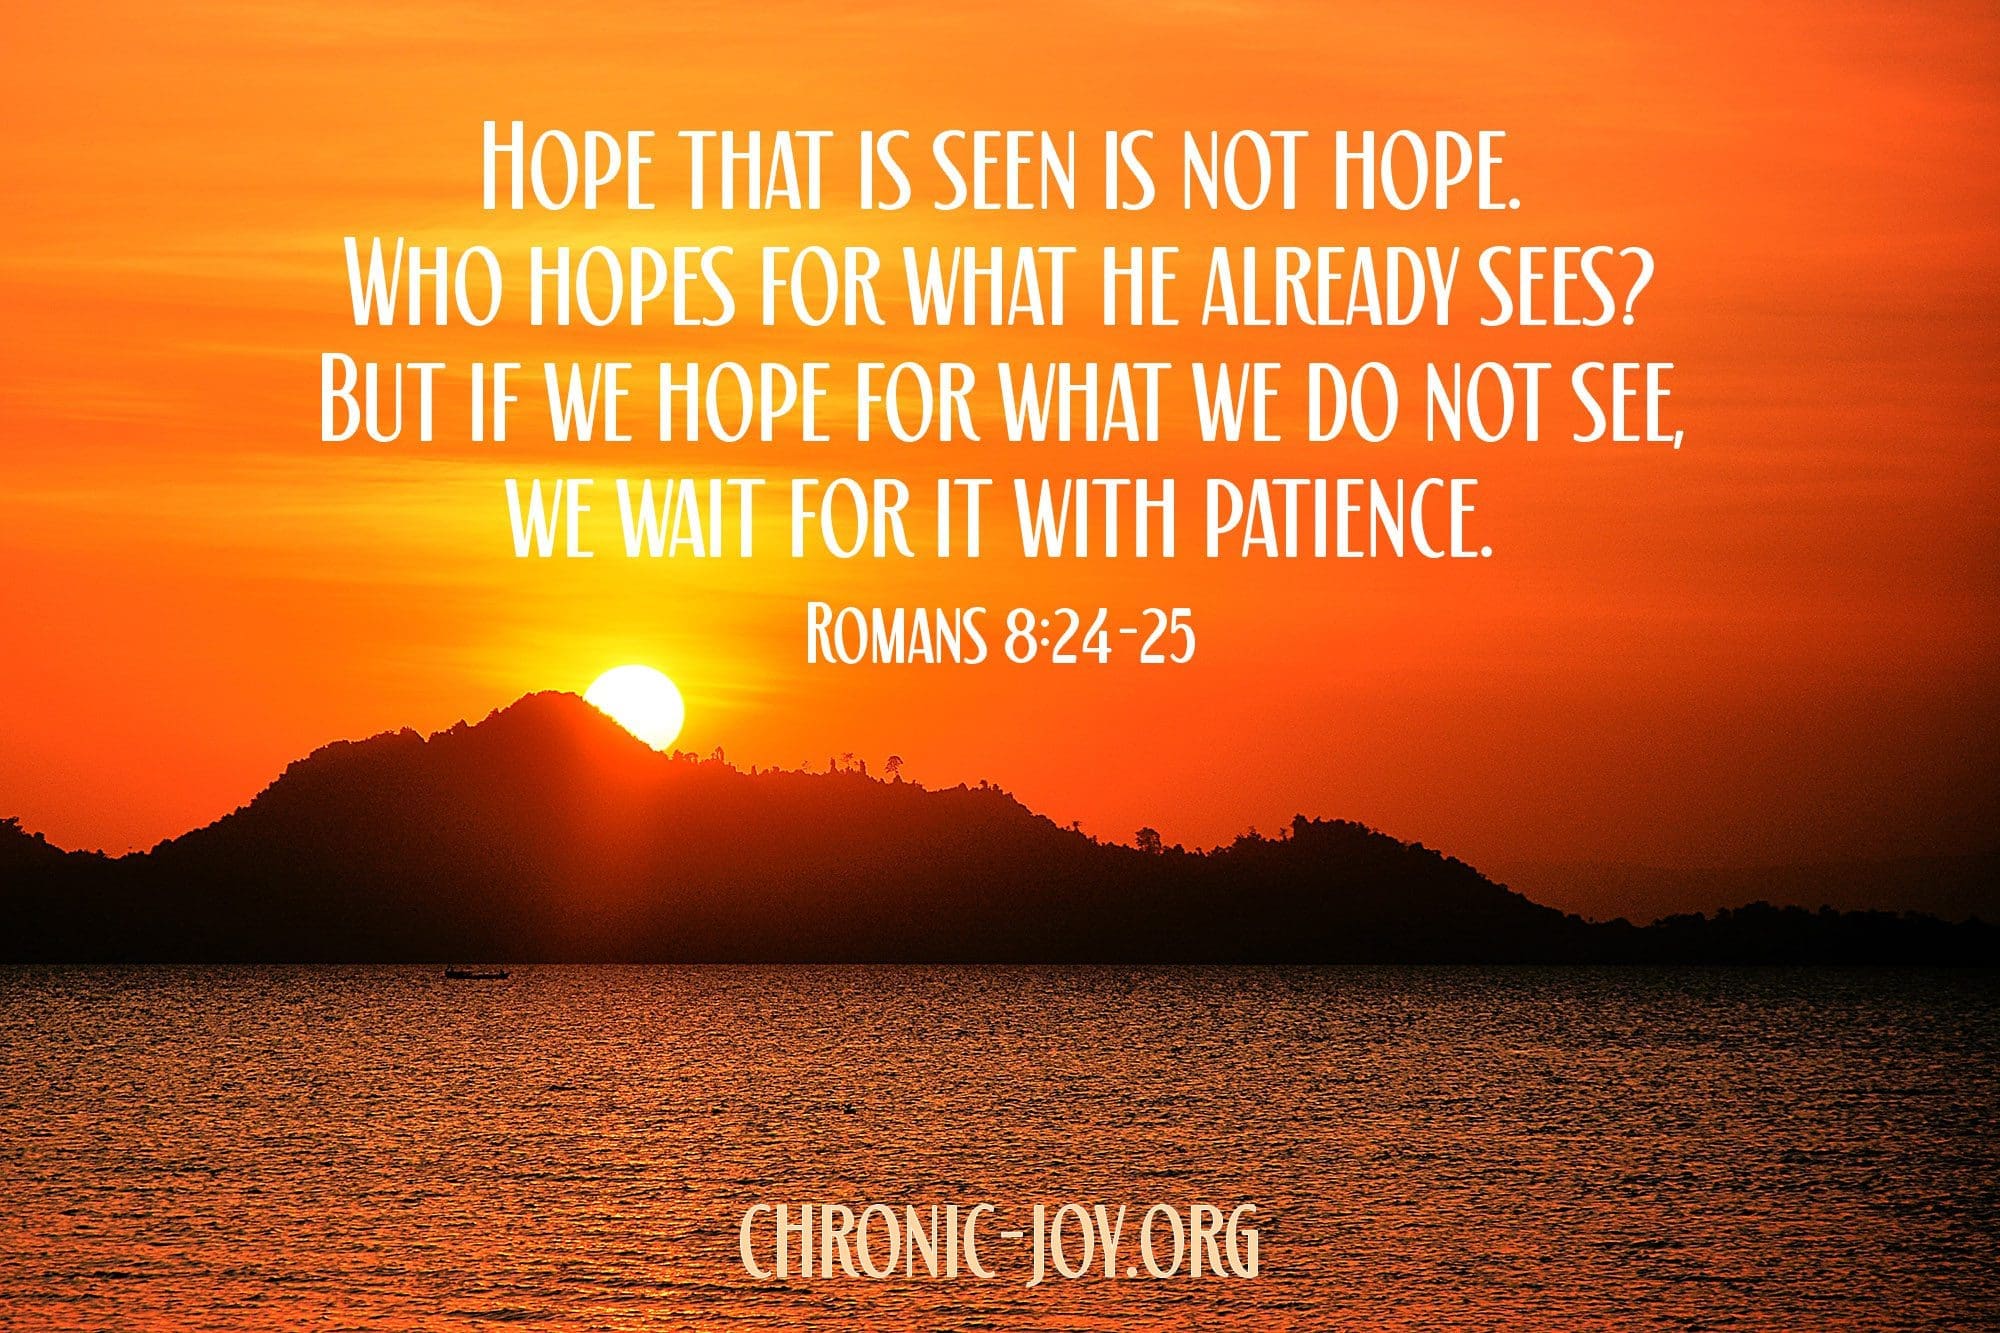 "Hope that is seen is not hope. Who hopes for what he already sees? But if we hope for what we do not see, we wait for it with patience." Romans 8:24-25